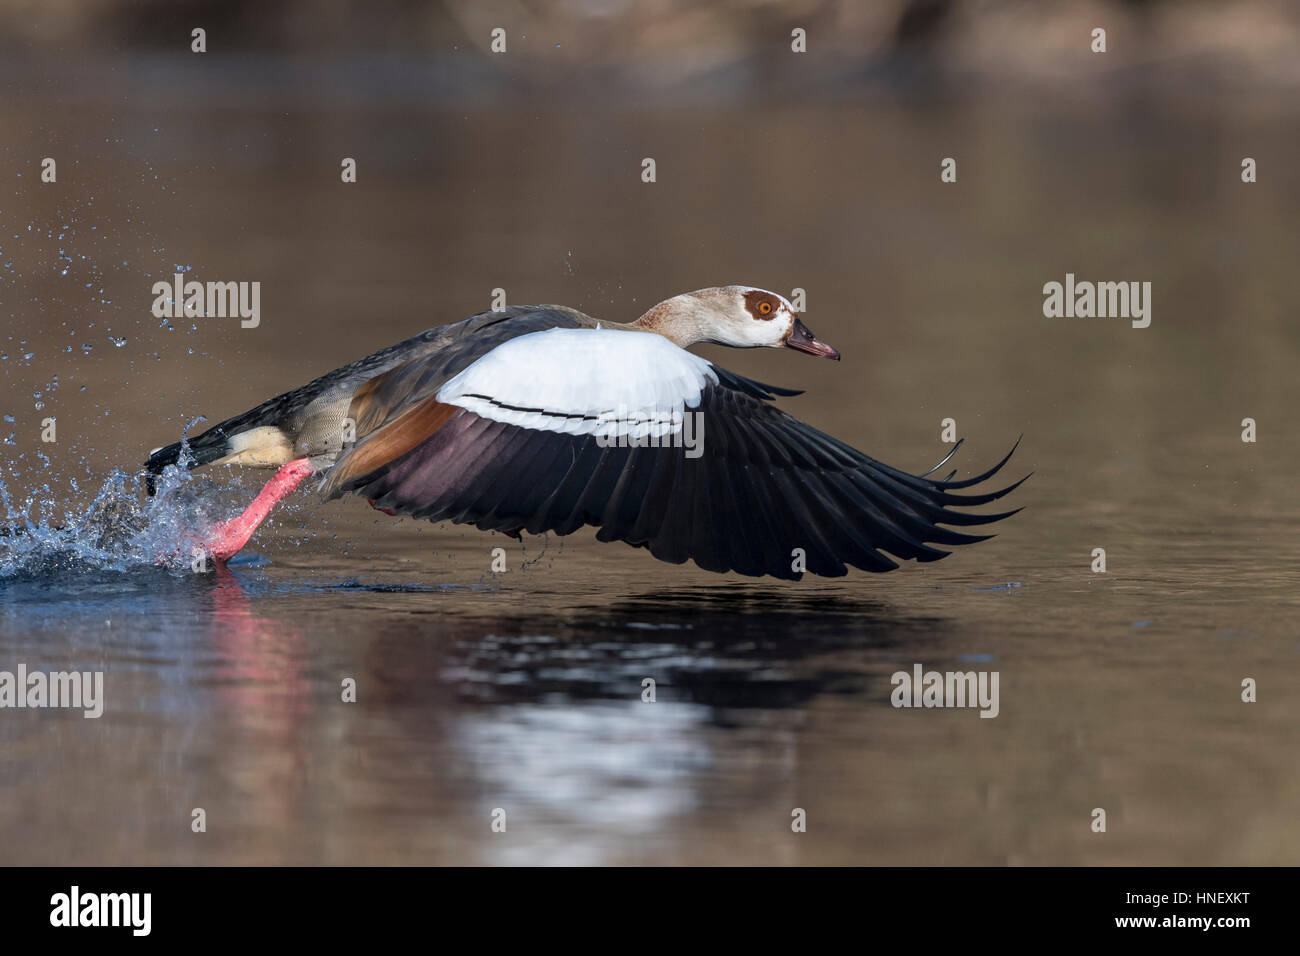 Egyptian Goose (Alopochen aegyptiaca) starting from the water, in the air, Hesse, Germany Stock Photo